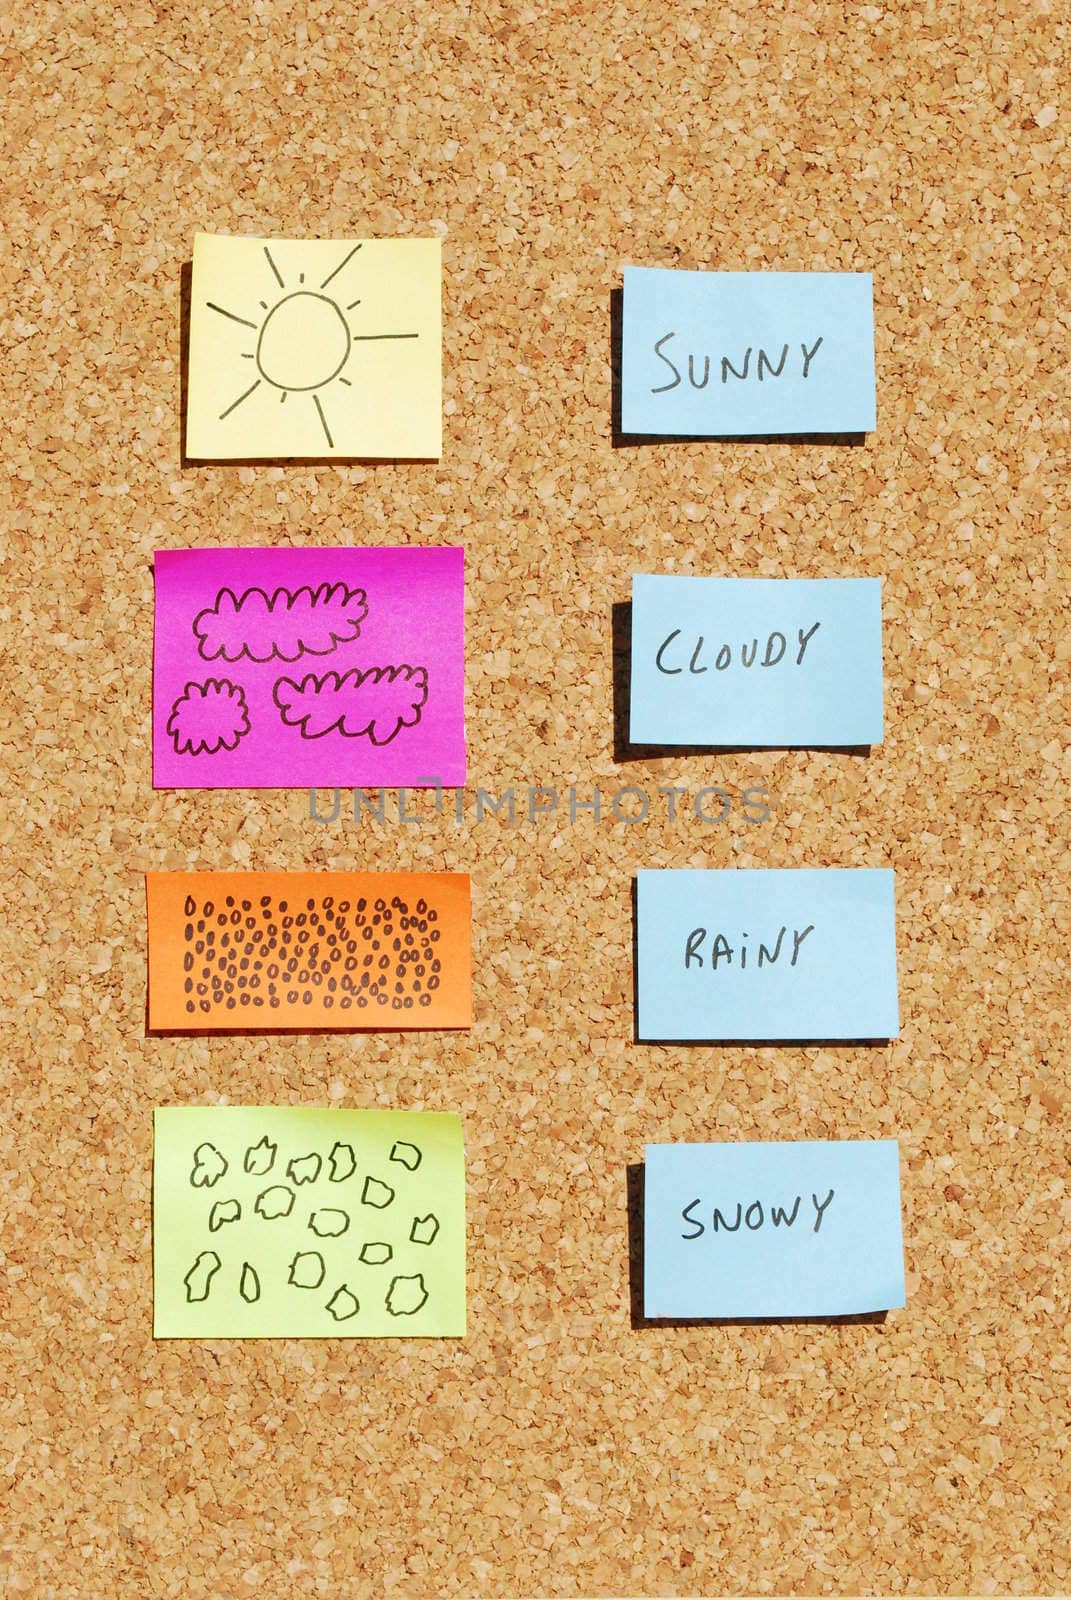 concept about types of weathers on a cork board